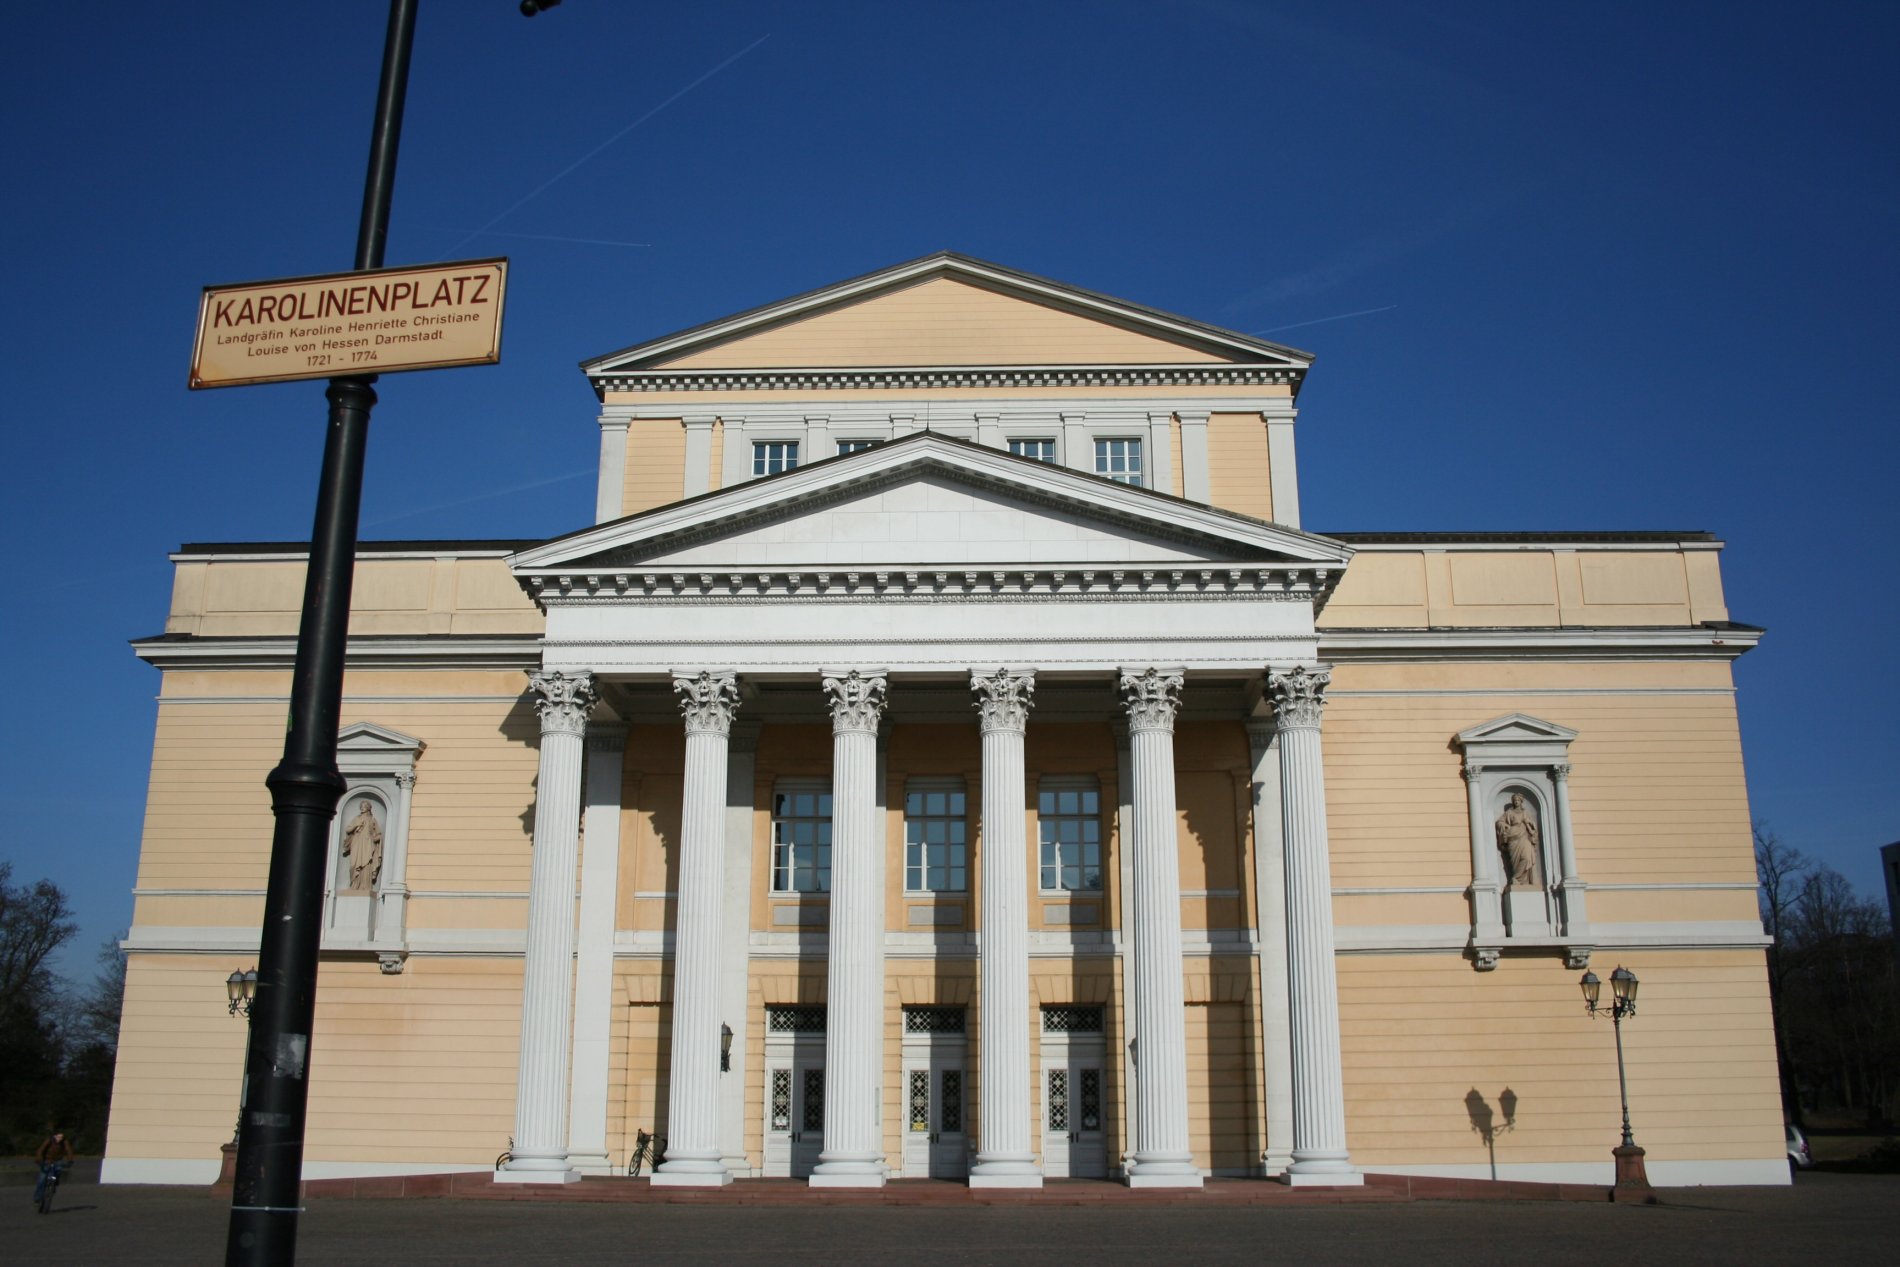 Classicist style building, made of yellowish stones with a white proticus in front of the main building with 6 white columns.